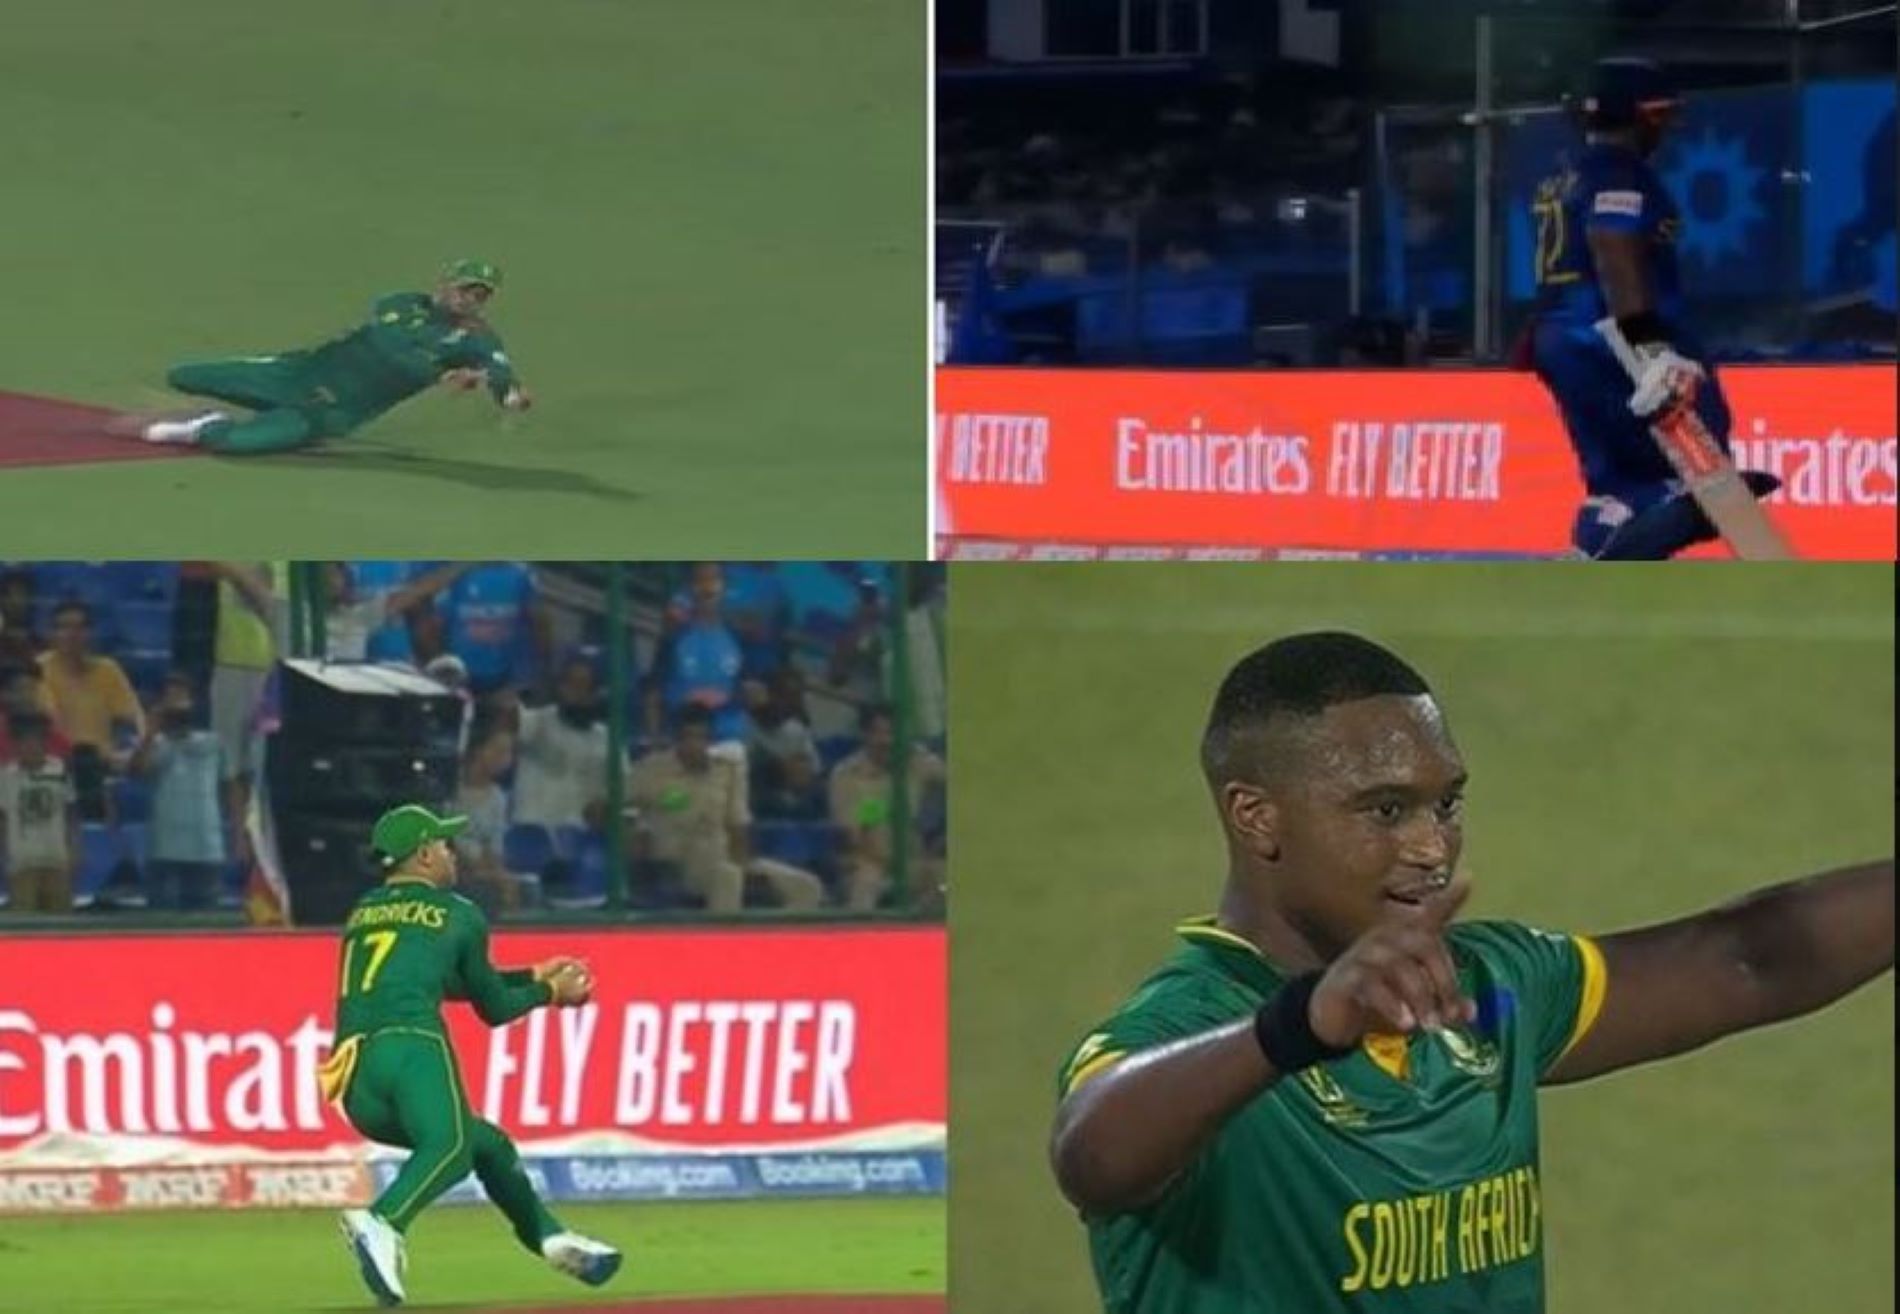 Ngidi was the beneficiary of the acrobatic effort by Hendricks